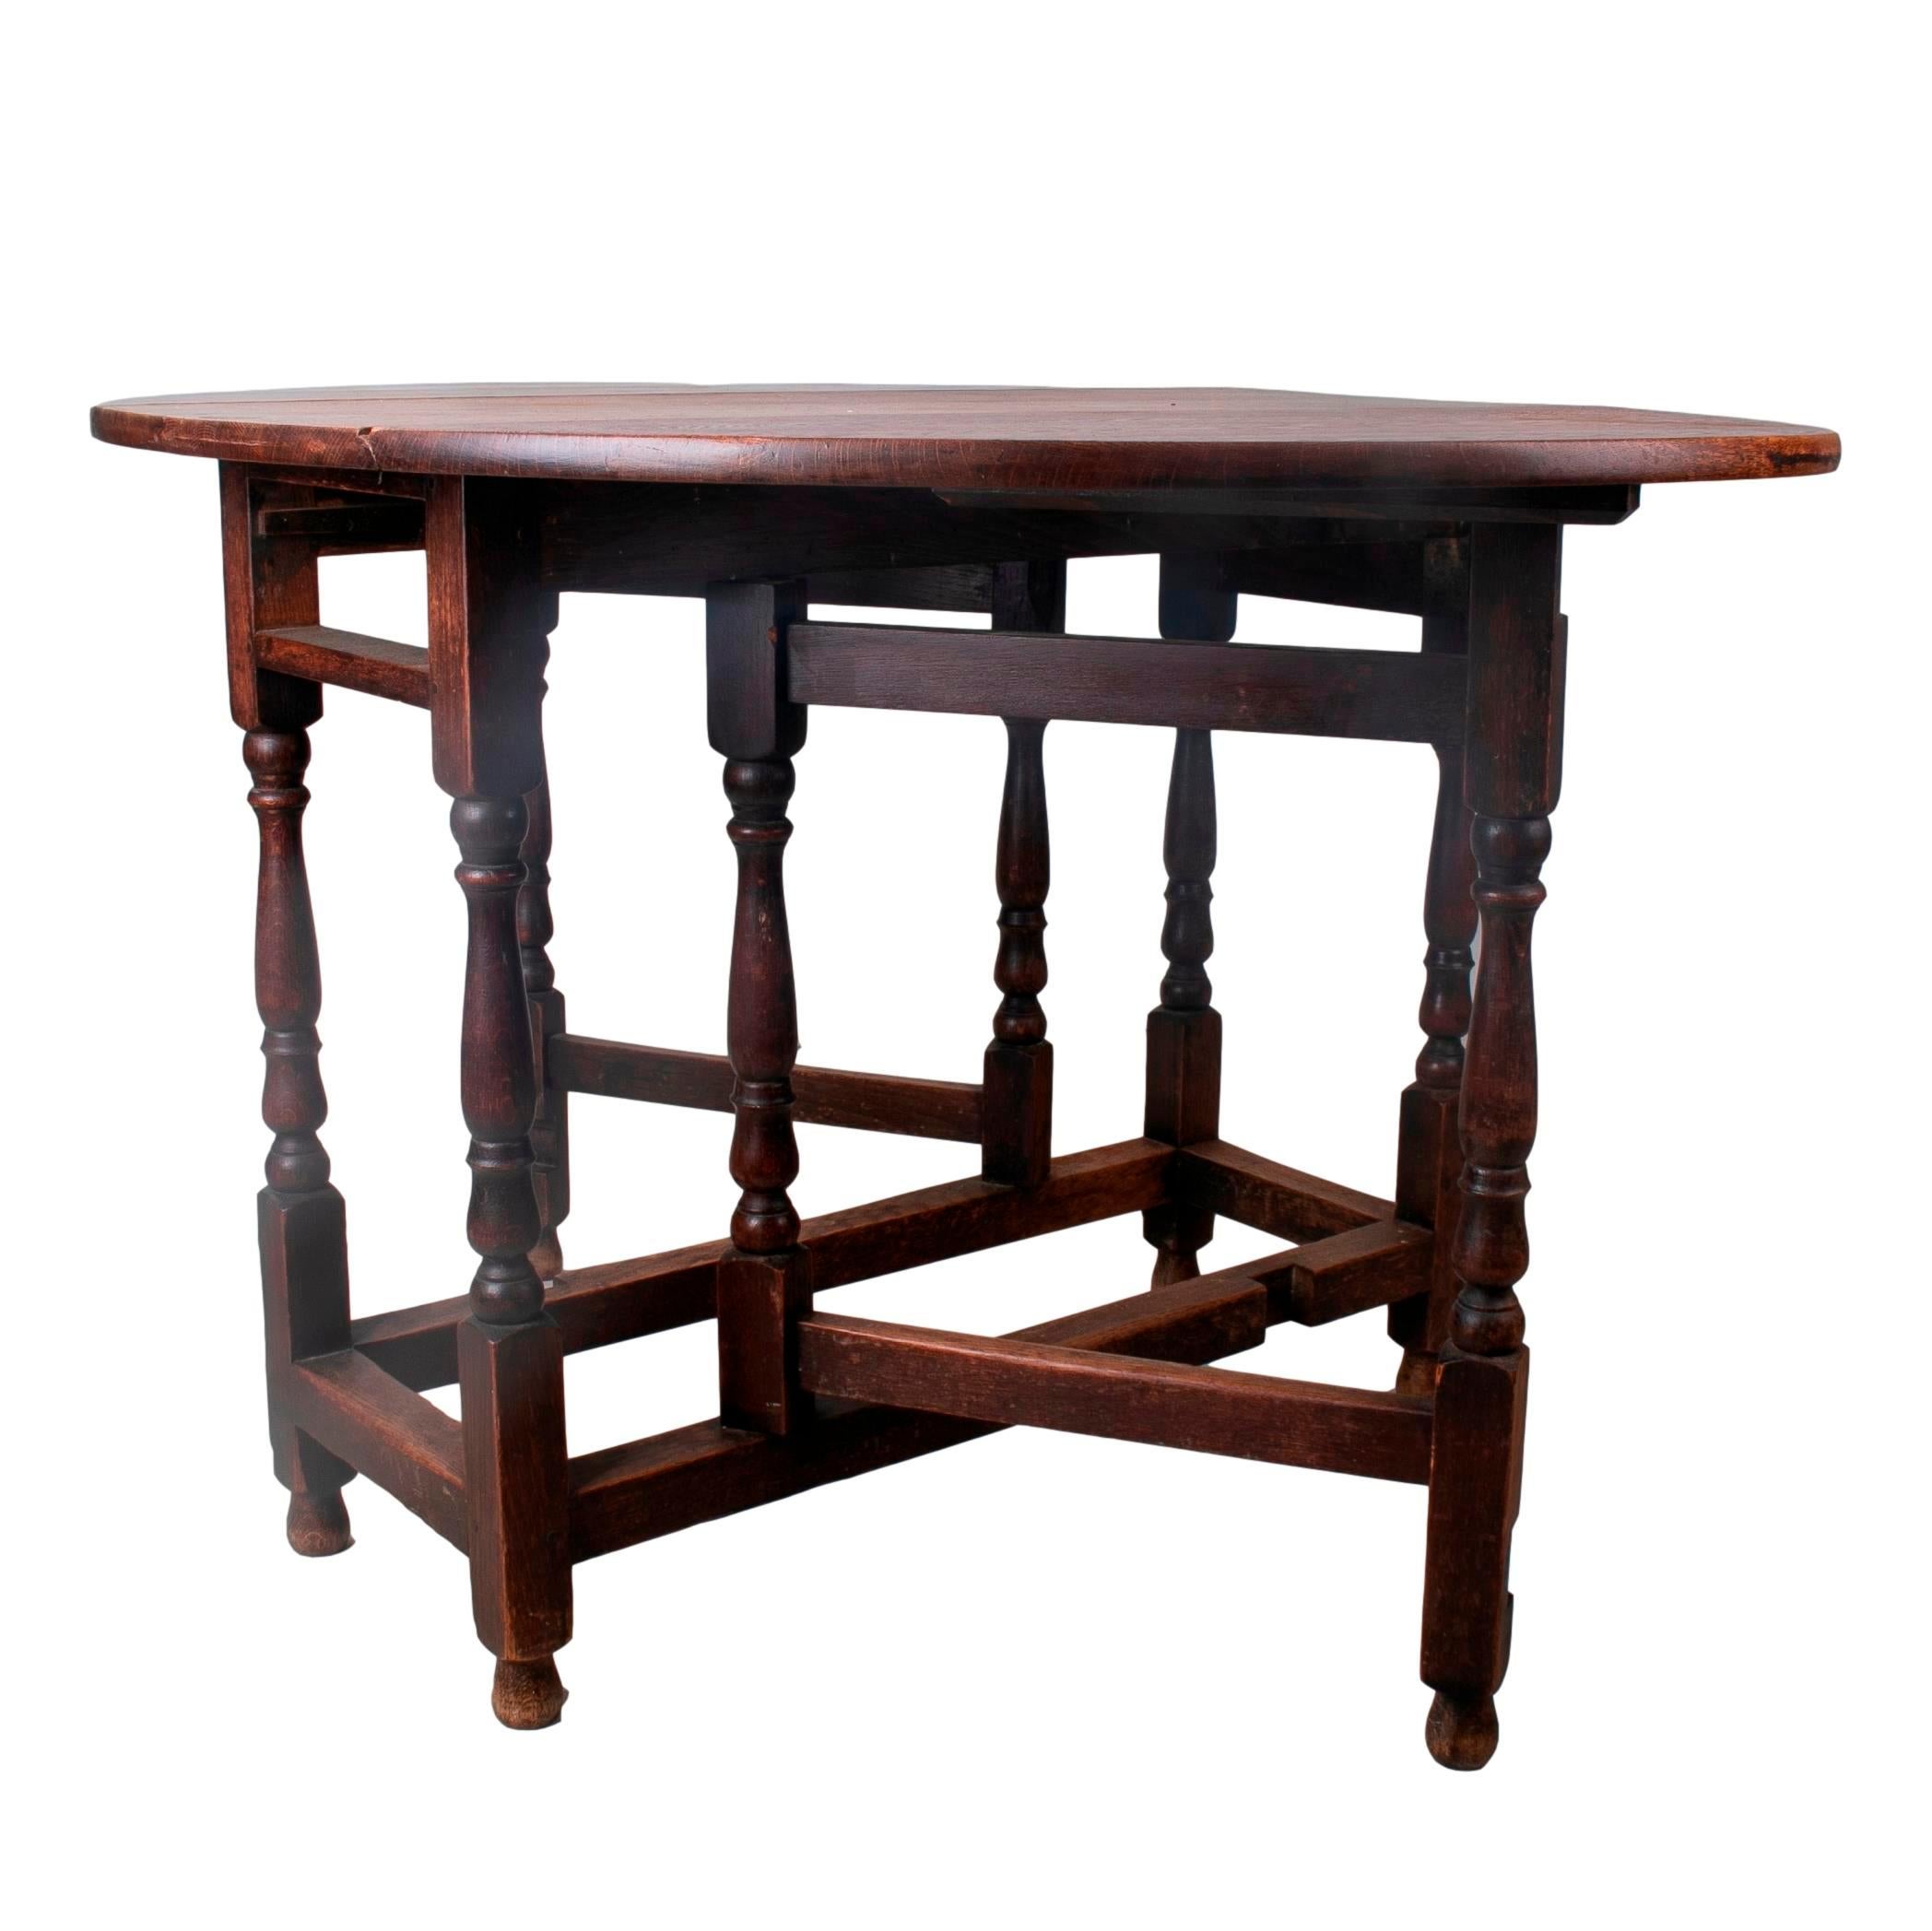 Elm 19th Century English Spindle Leg Winged Wooden Table